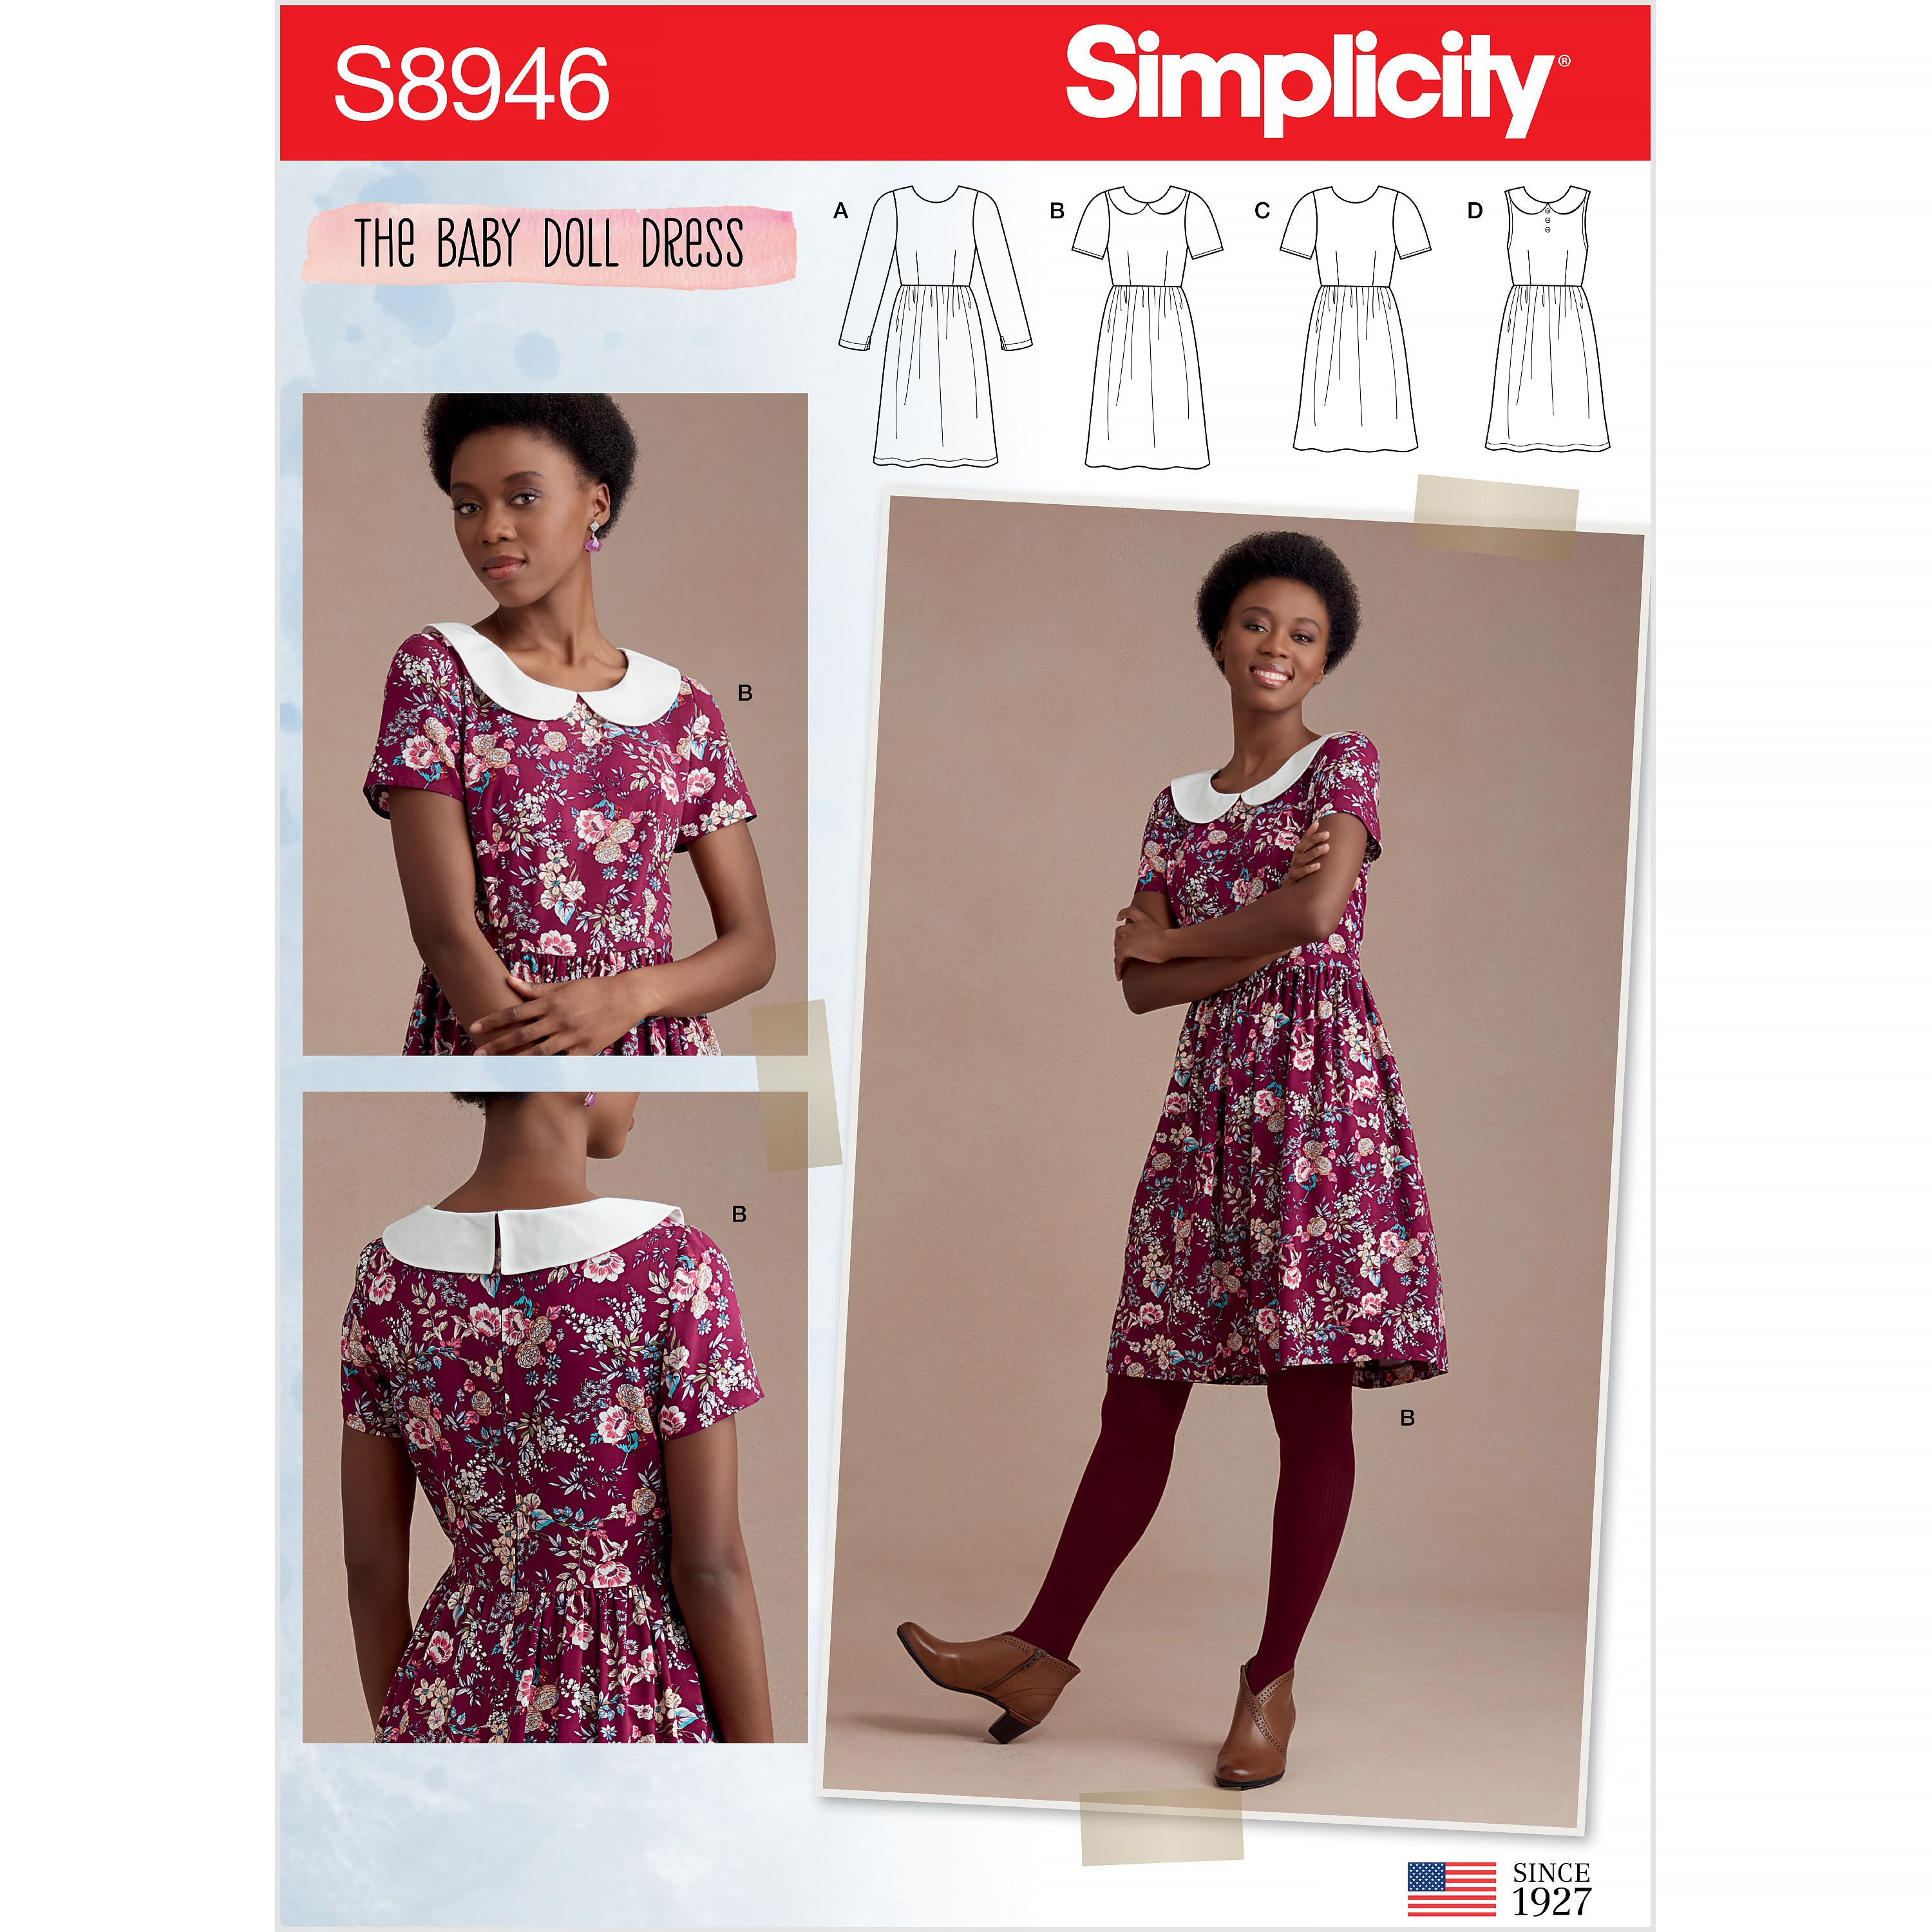 Paper 22 x 15 x 1 cm White Simplicity Misses Dress with Sleeve Variations Sewing Pattern